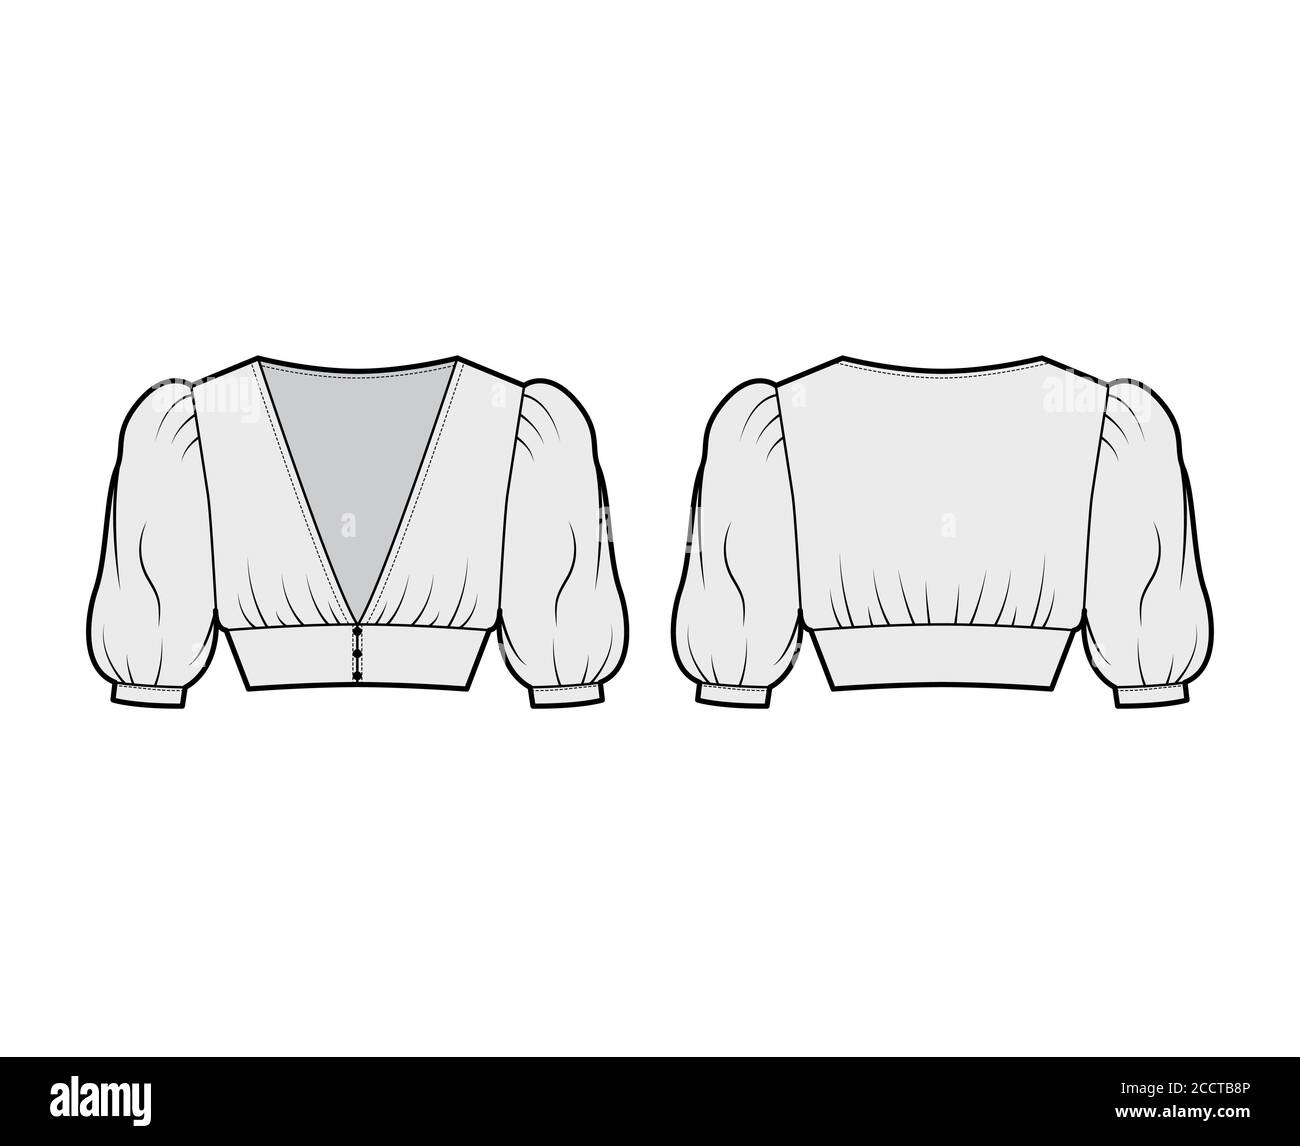 Cropped top technical fashion illustration with short sleeves, puffed shoulders, front button fastenings, fitted body. Flat apparel shirt template front back, grey color. Women men, unisex blouse CAD Stock Vector